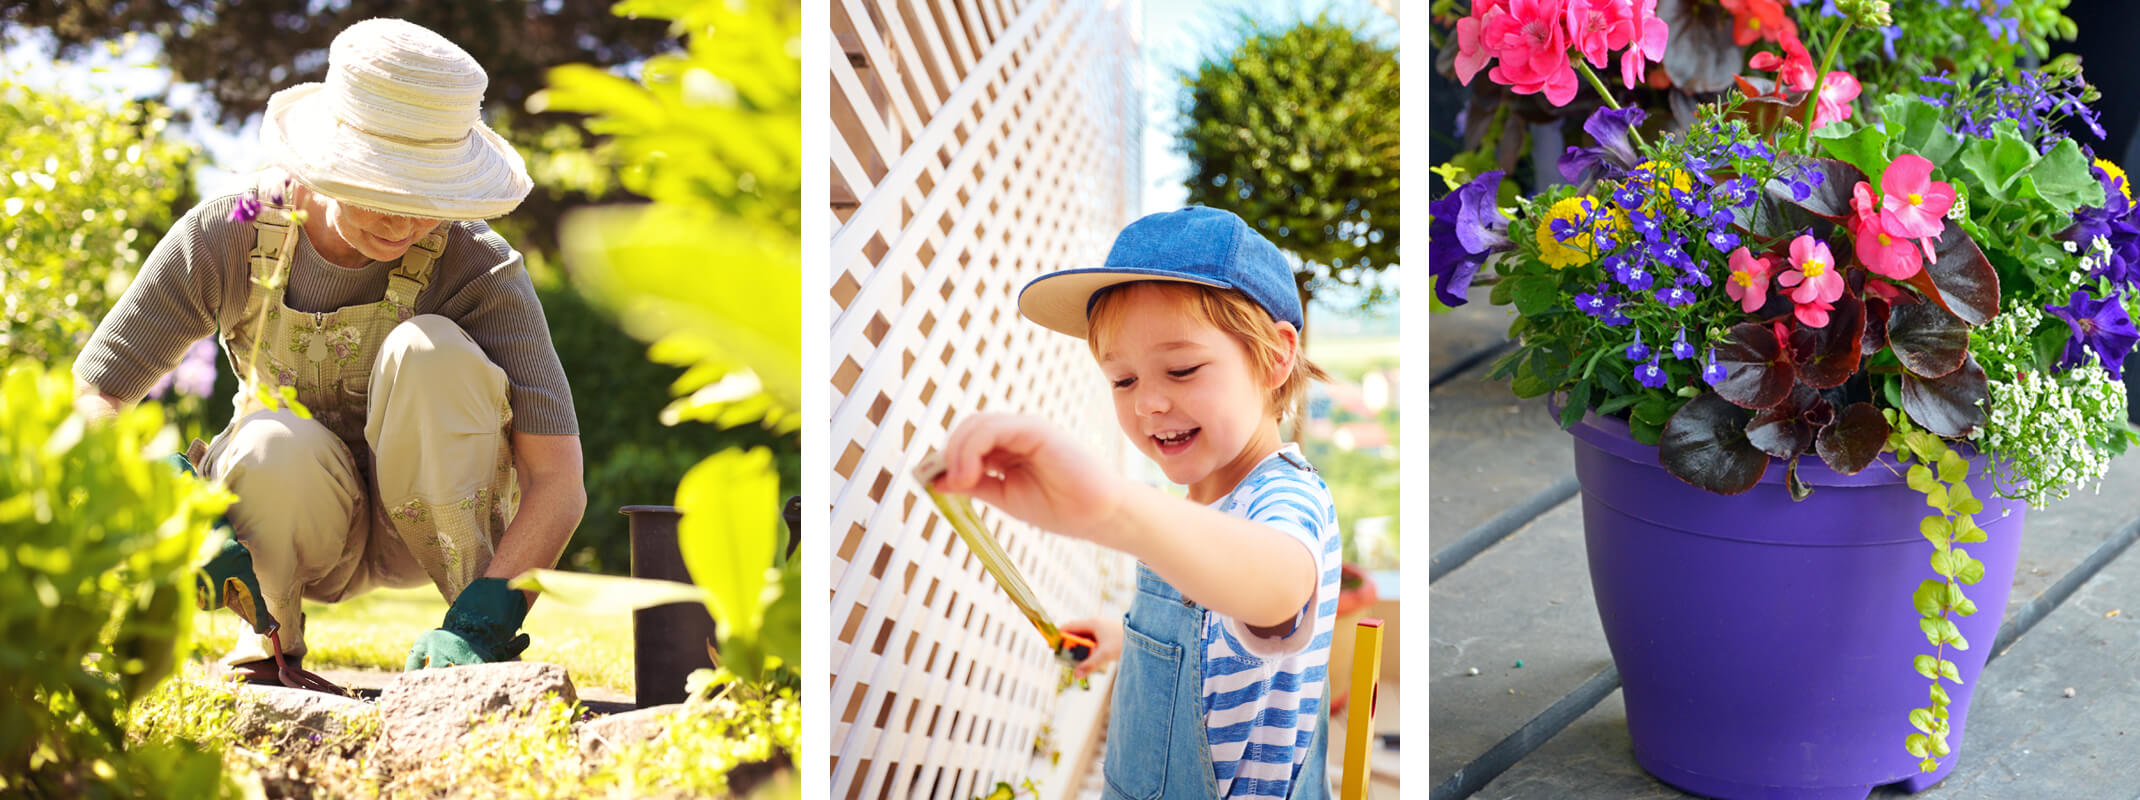 3 images with the first being a woman bending over in the garden and the second a young boy measuring out a trellis and the third a colorful purple garden container full of flowers